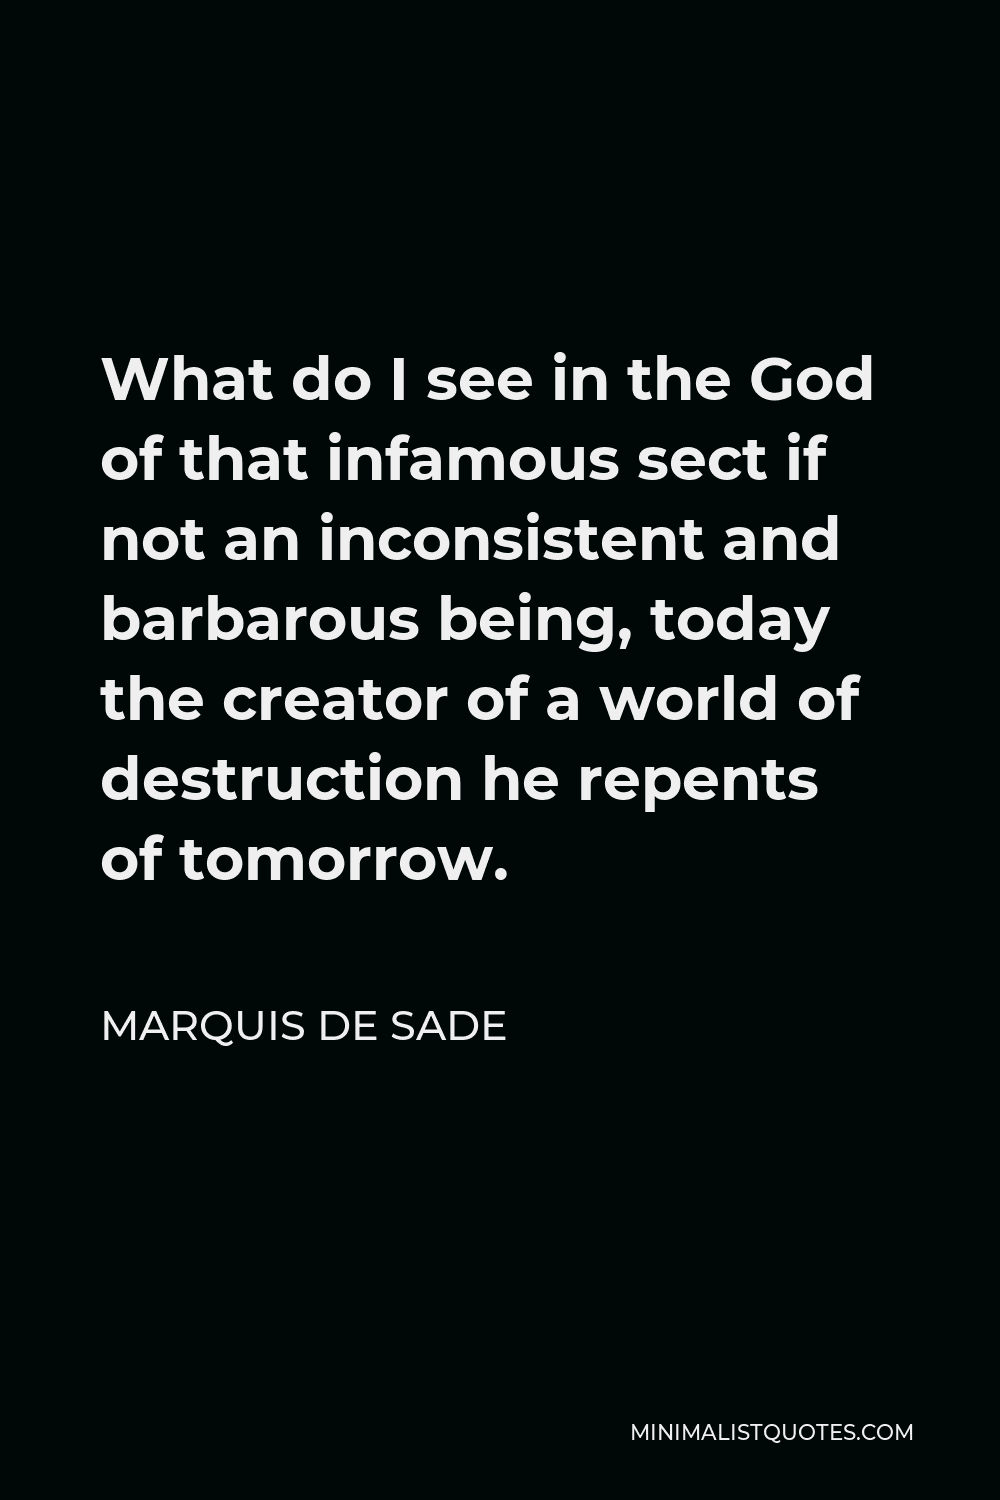 Marquis de Sade Quote - What do I see in the God of that infamous sect if not an inconsistent and barbarous being, today the creator of a world of destruction he repents of tomorrow.